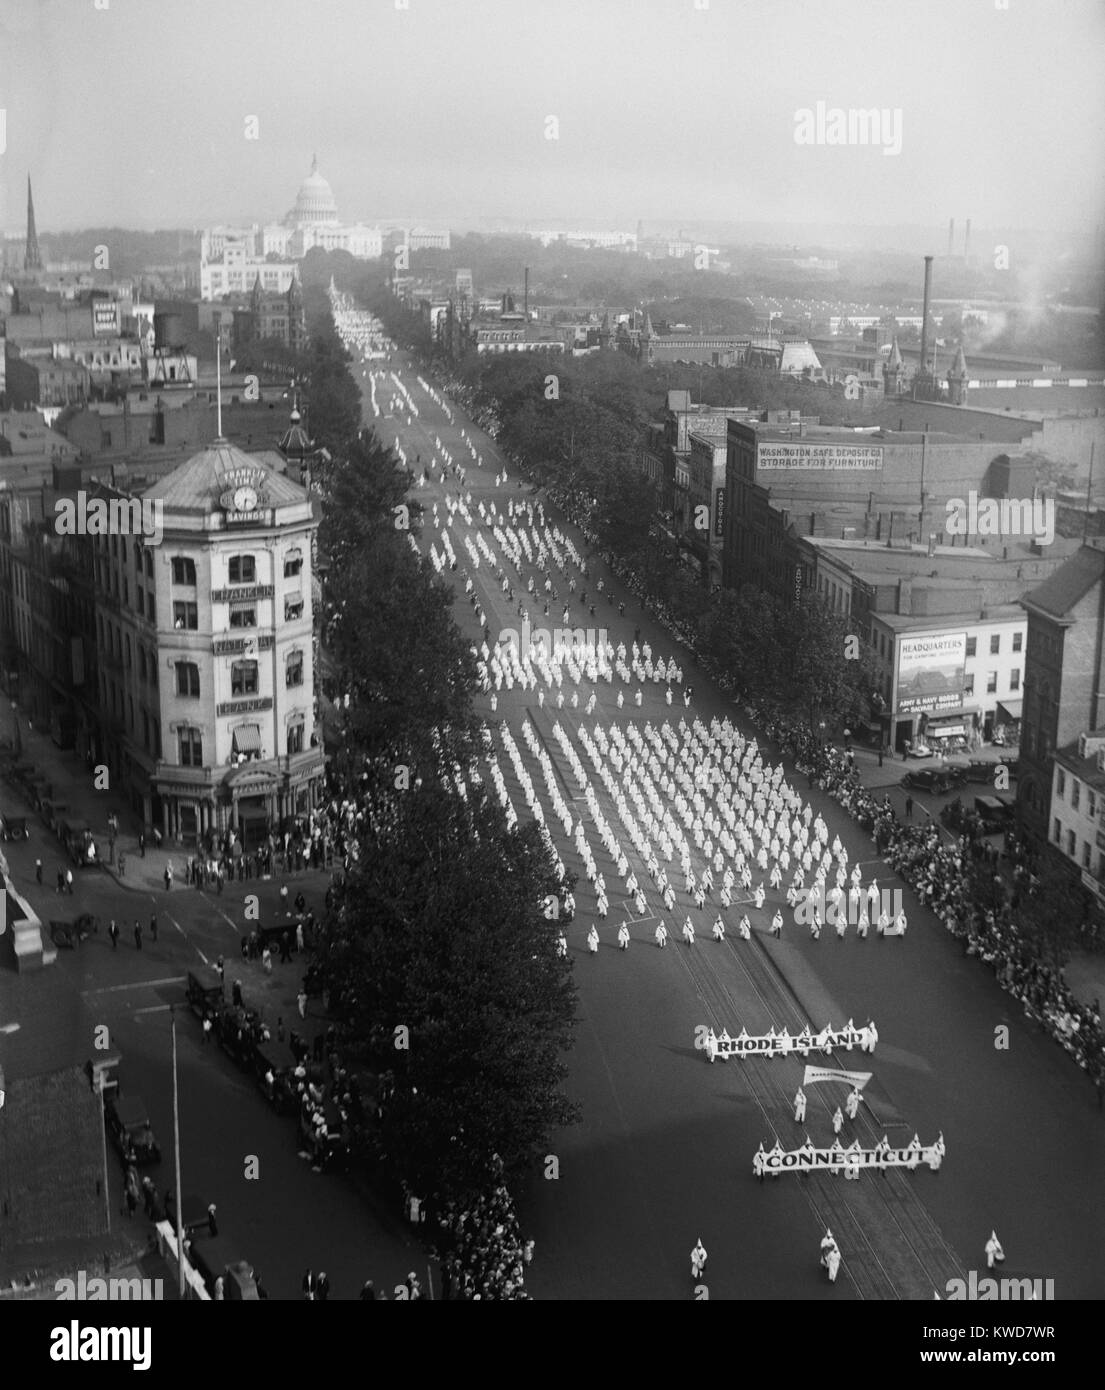 Ku Klux Klan parade on Pennsylvania Avenue extends back to the Capitol in Washington, D.C. Sept. 13, 1926. In spite of the thousands of marchers, the Second KKK was in decline, due to internal feuding, financial investigations, and the 1925 murder trial of Grand Dragon D. C. Stephenson. (BSLOC 2015 16 185) Stock Photo